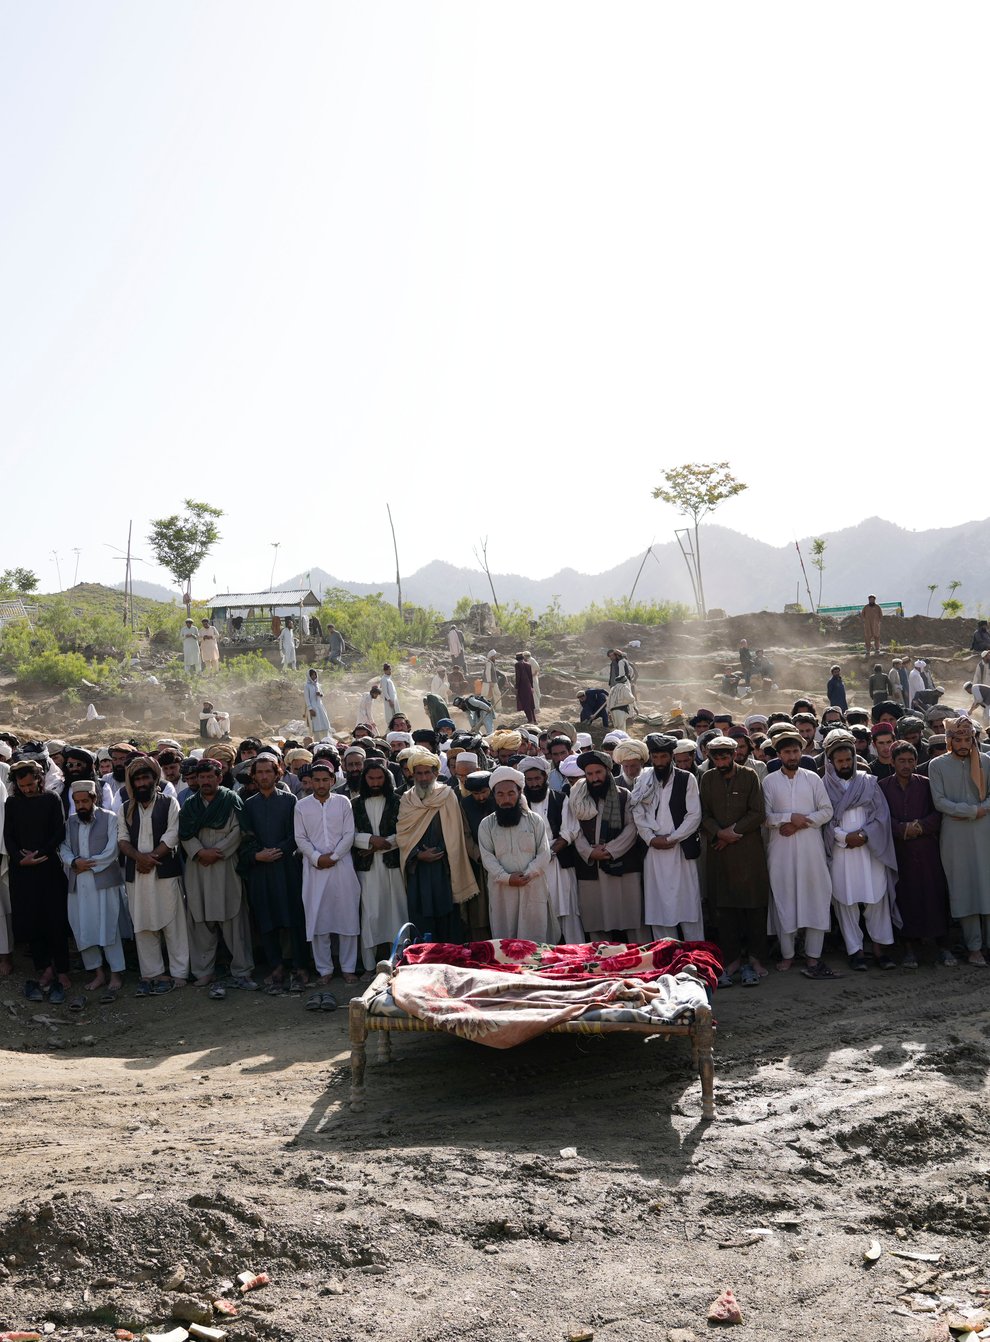 Afghans pray for relatives killed in the earthquake at a burial site in Gayan village, Paktika province (Ebrahim Nooroozi/AP)